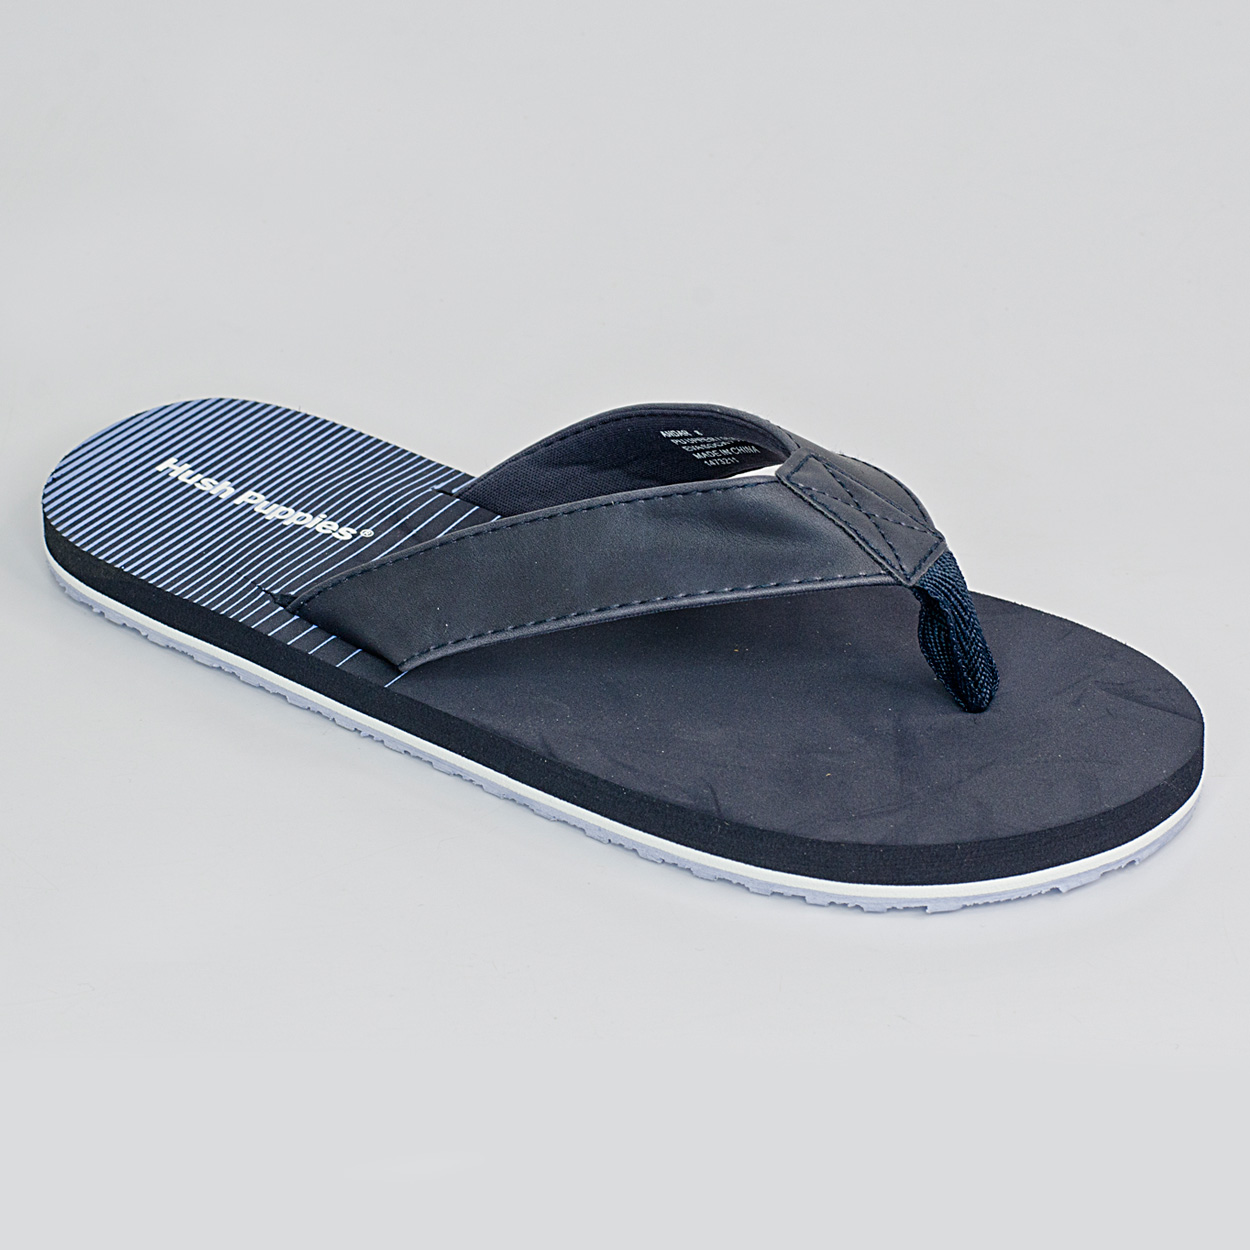 Hush Puppies The Good Slipper | Oxendales-sgquangbinhtourist.com.vn